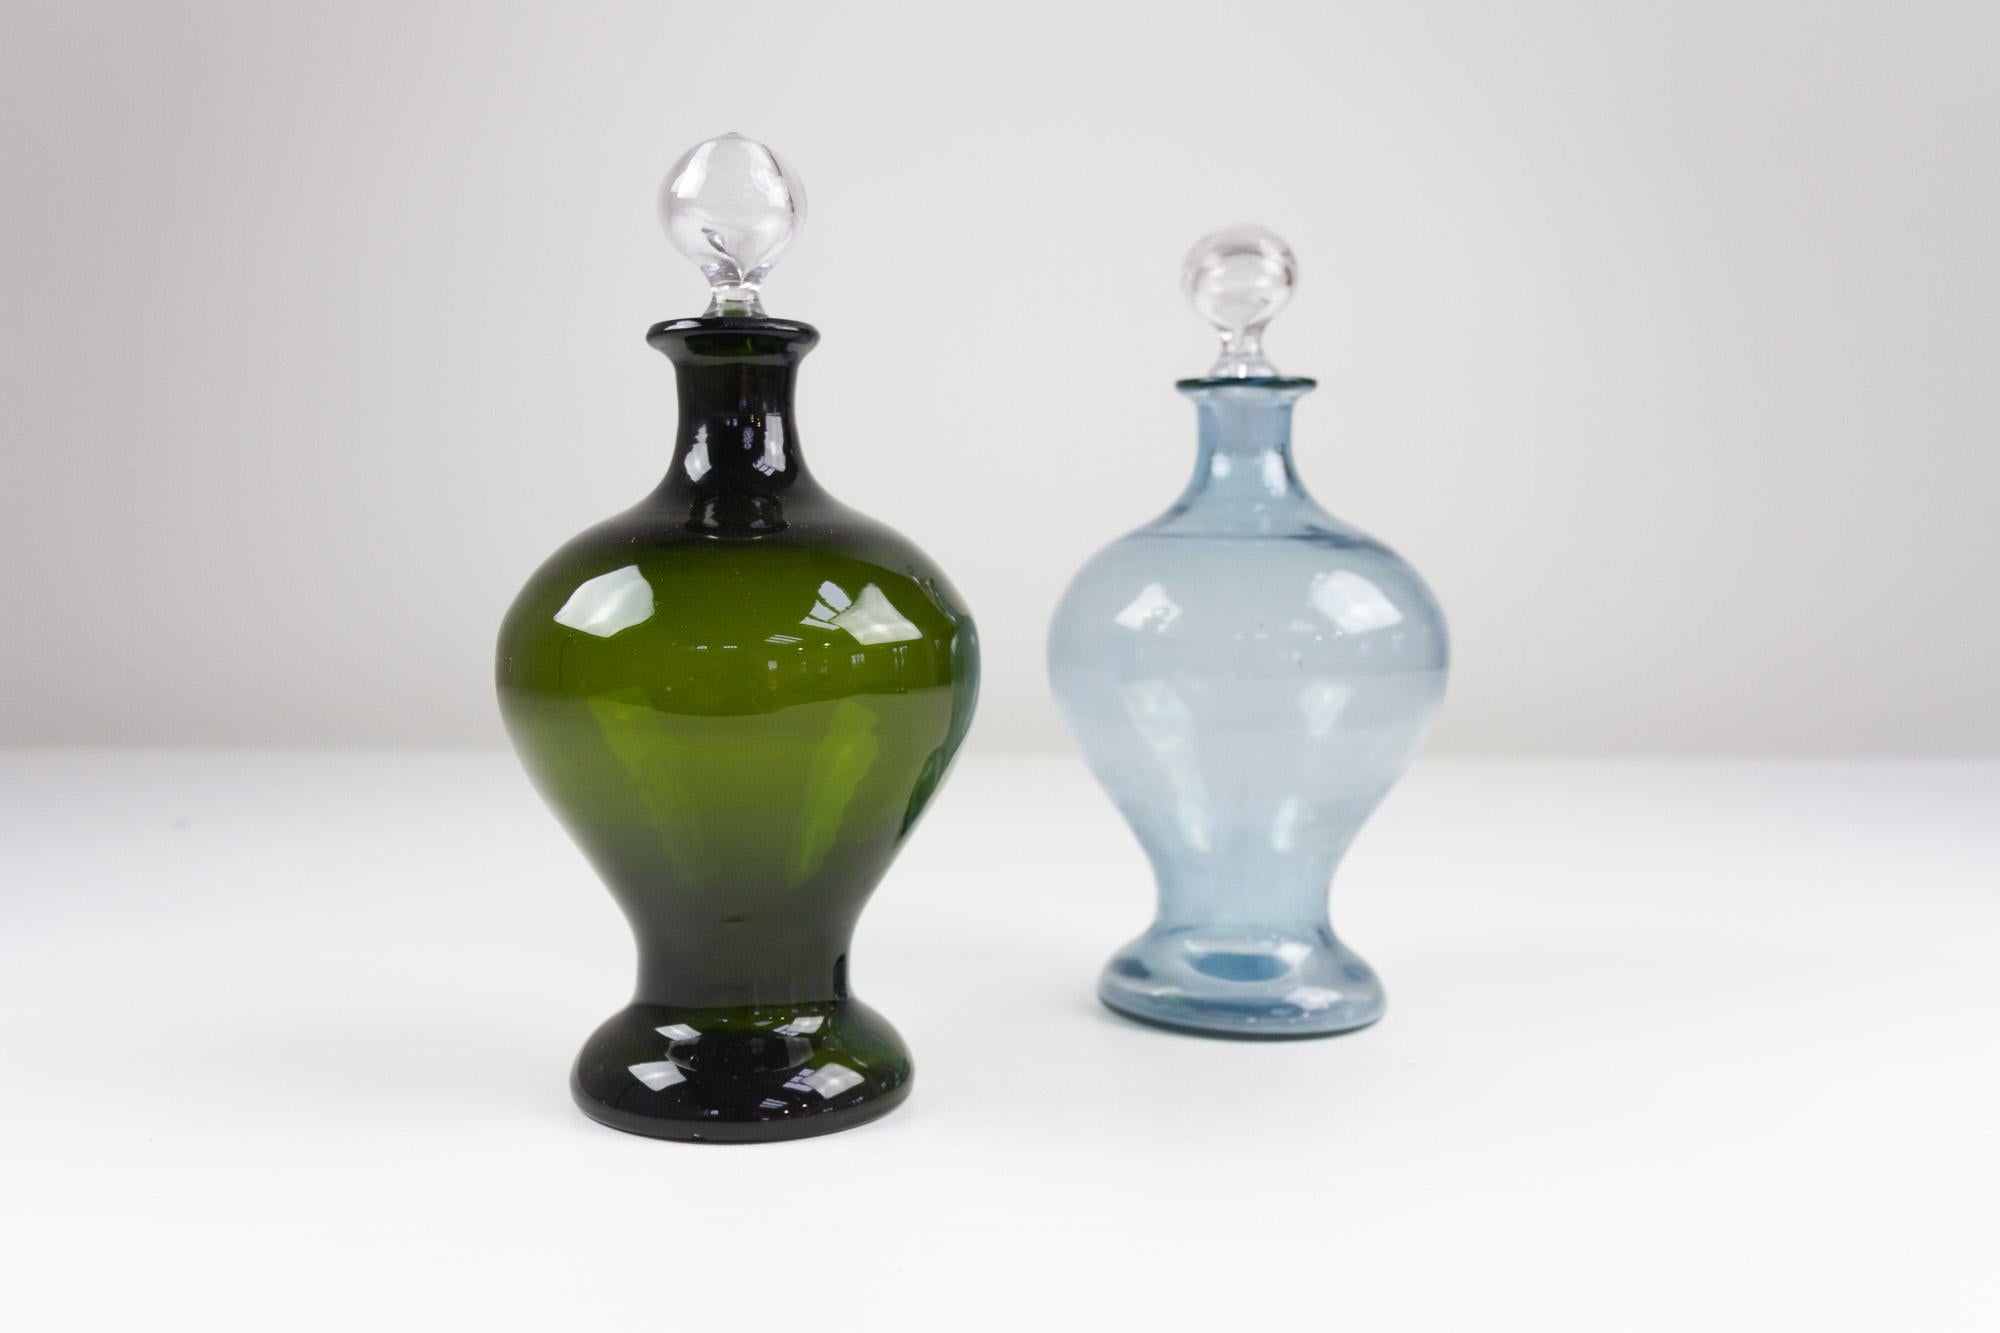 Danish Art Deco Blue and Green Glass Decanters, 1930s. Set of 2.
Set of two hand blown Scandinavian decanters with stoppers. One in light sky blue and one in dark green. Made in Denmark in the 1930s.
Good vintage condition. The green bottle has a